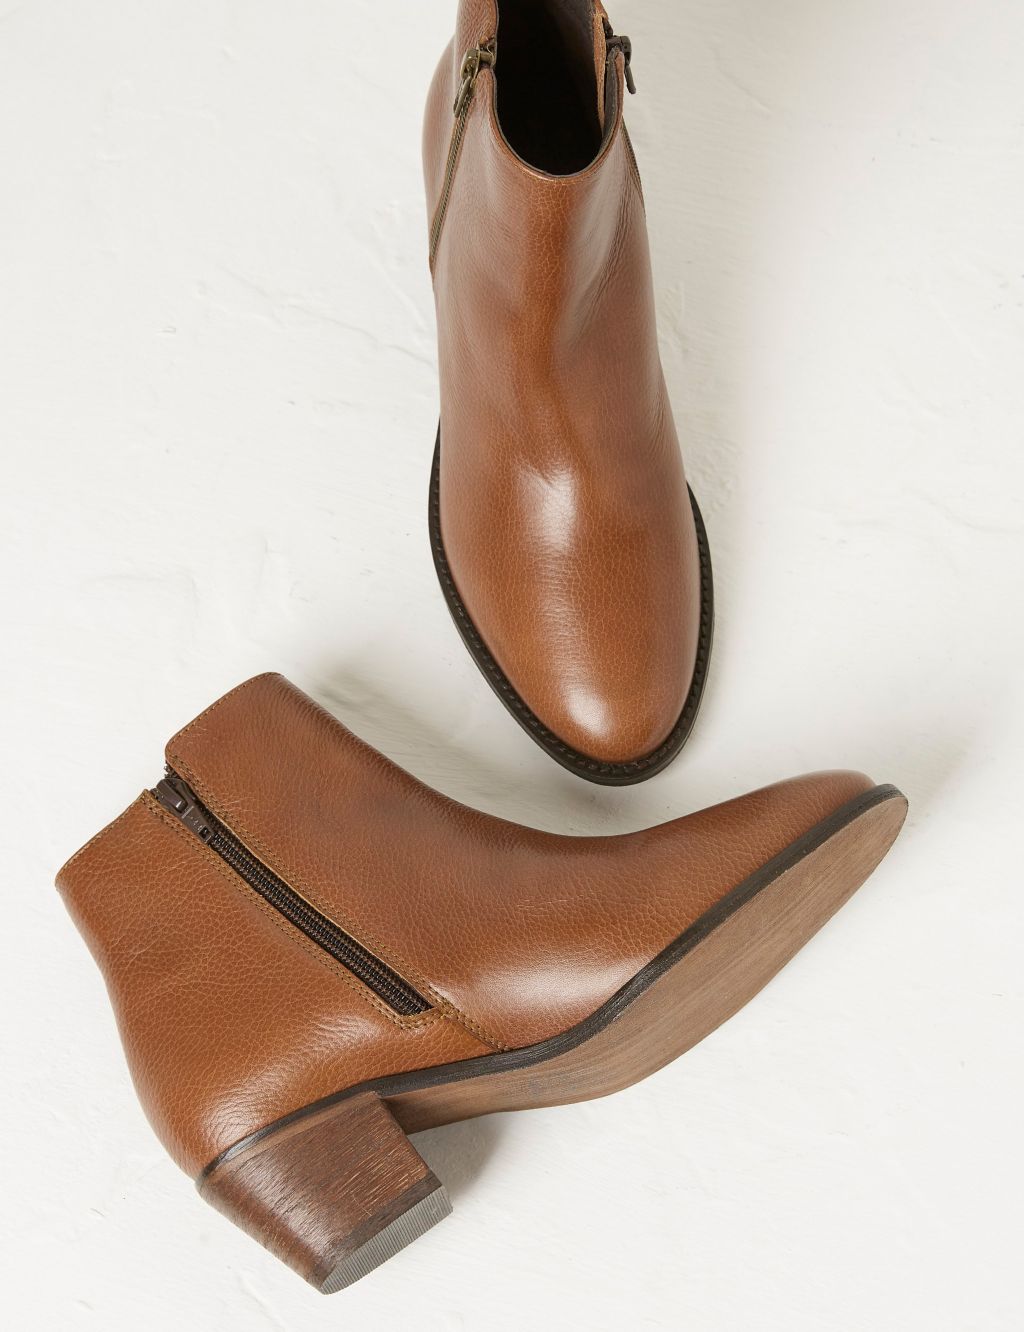 Leather Block Heel Ankle Boots 2 of 4